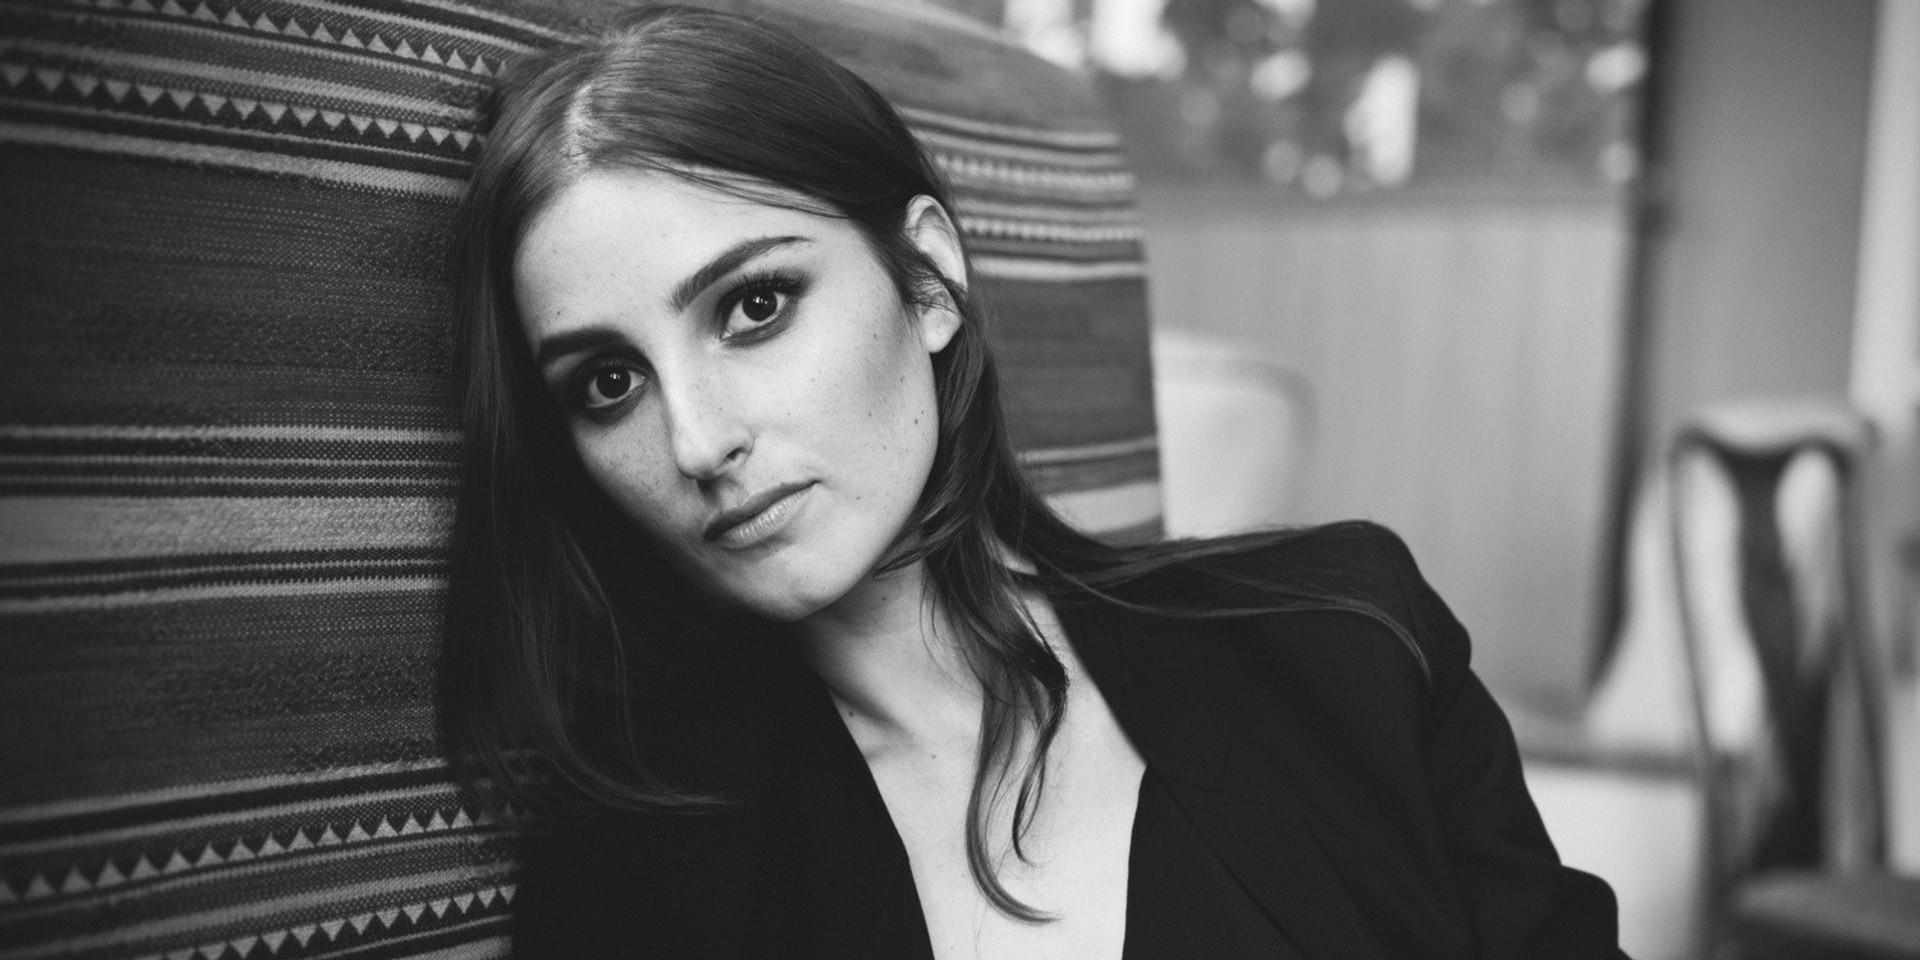 BANKS' upcoming Singapore concert is cancelled